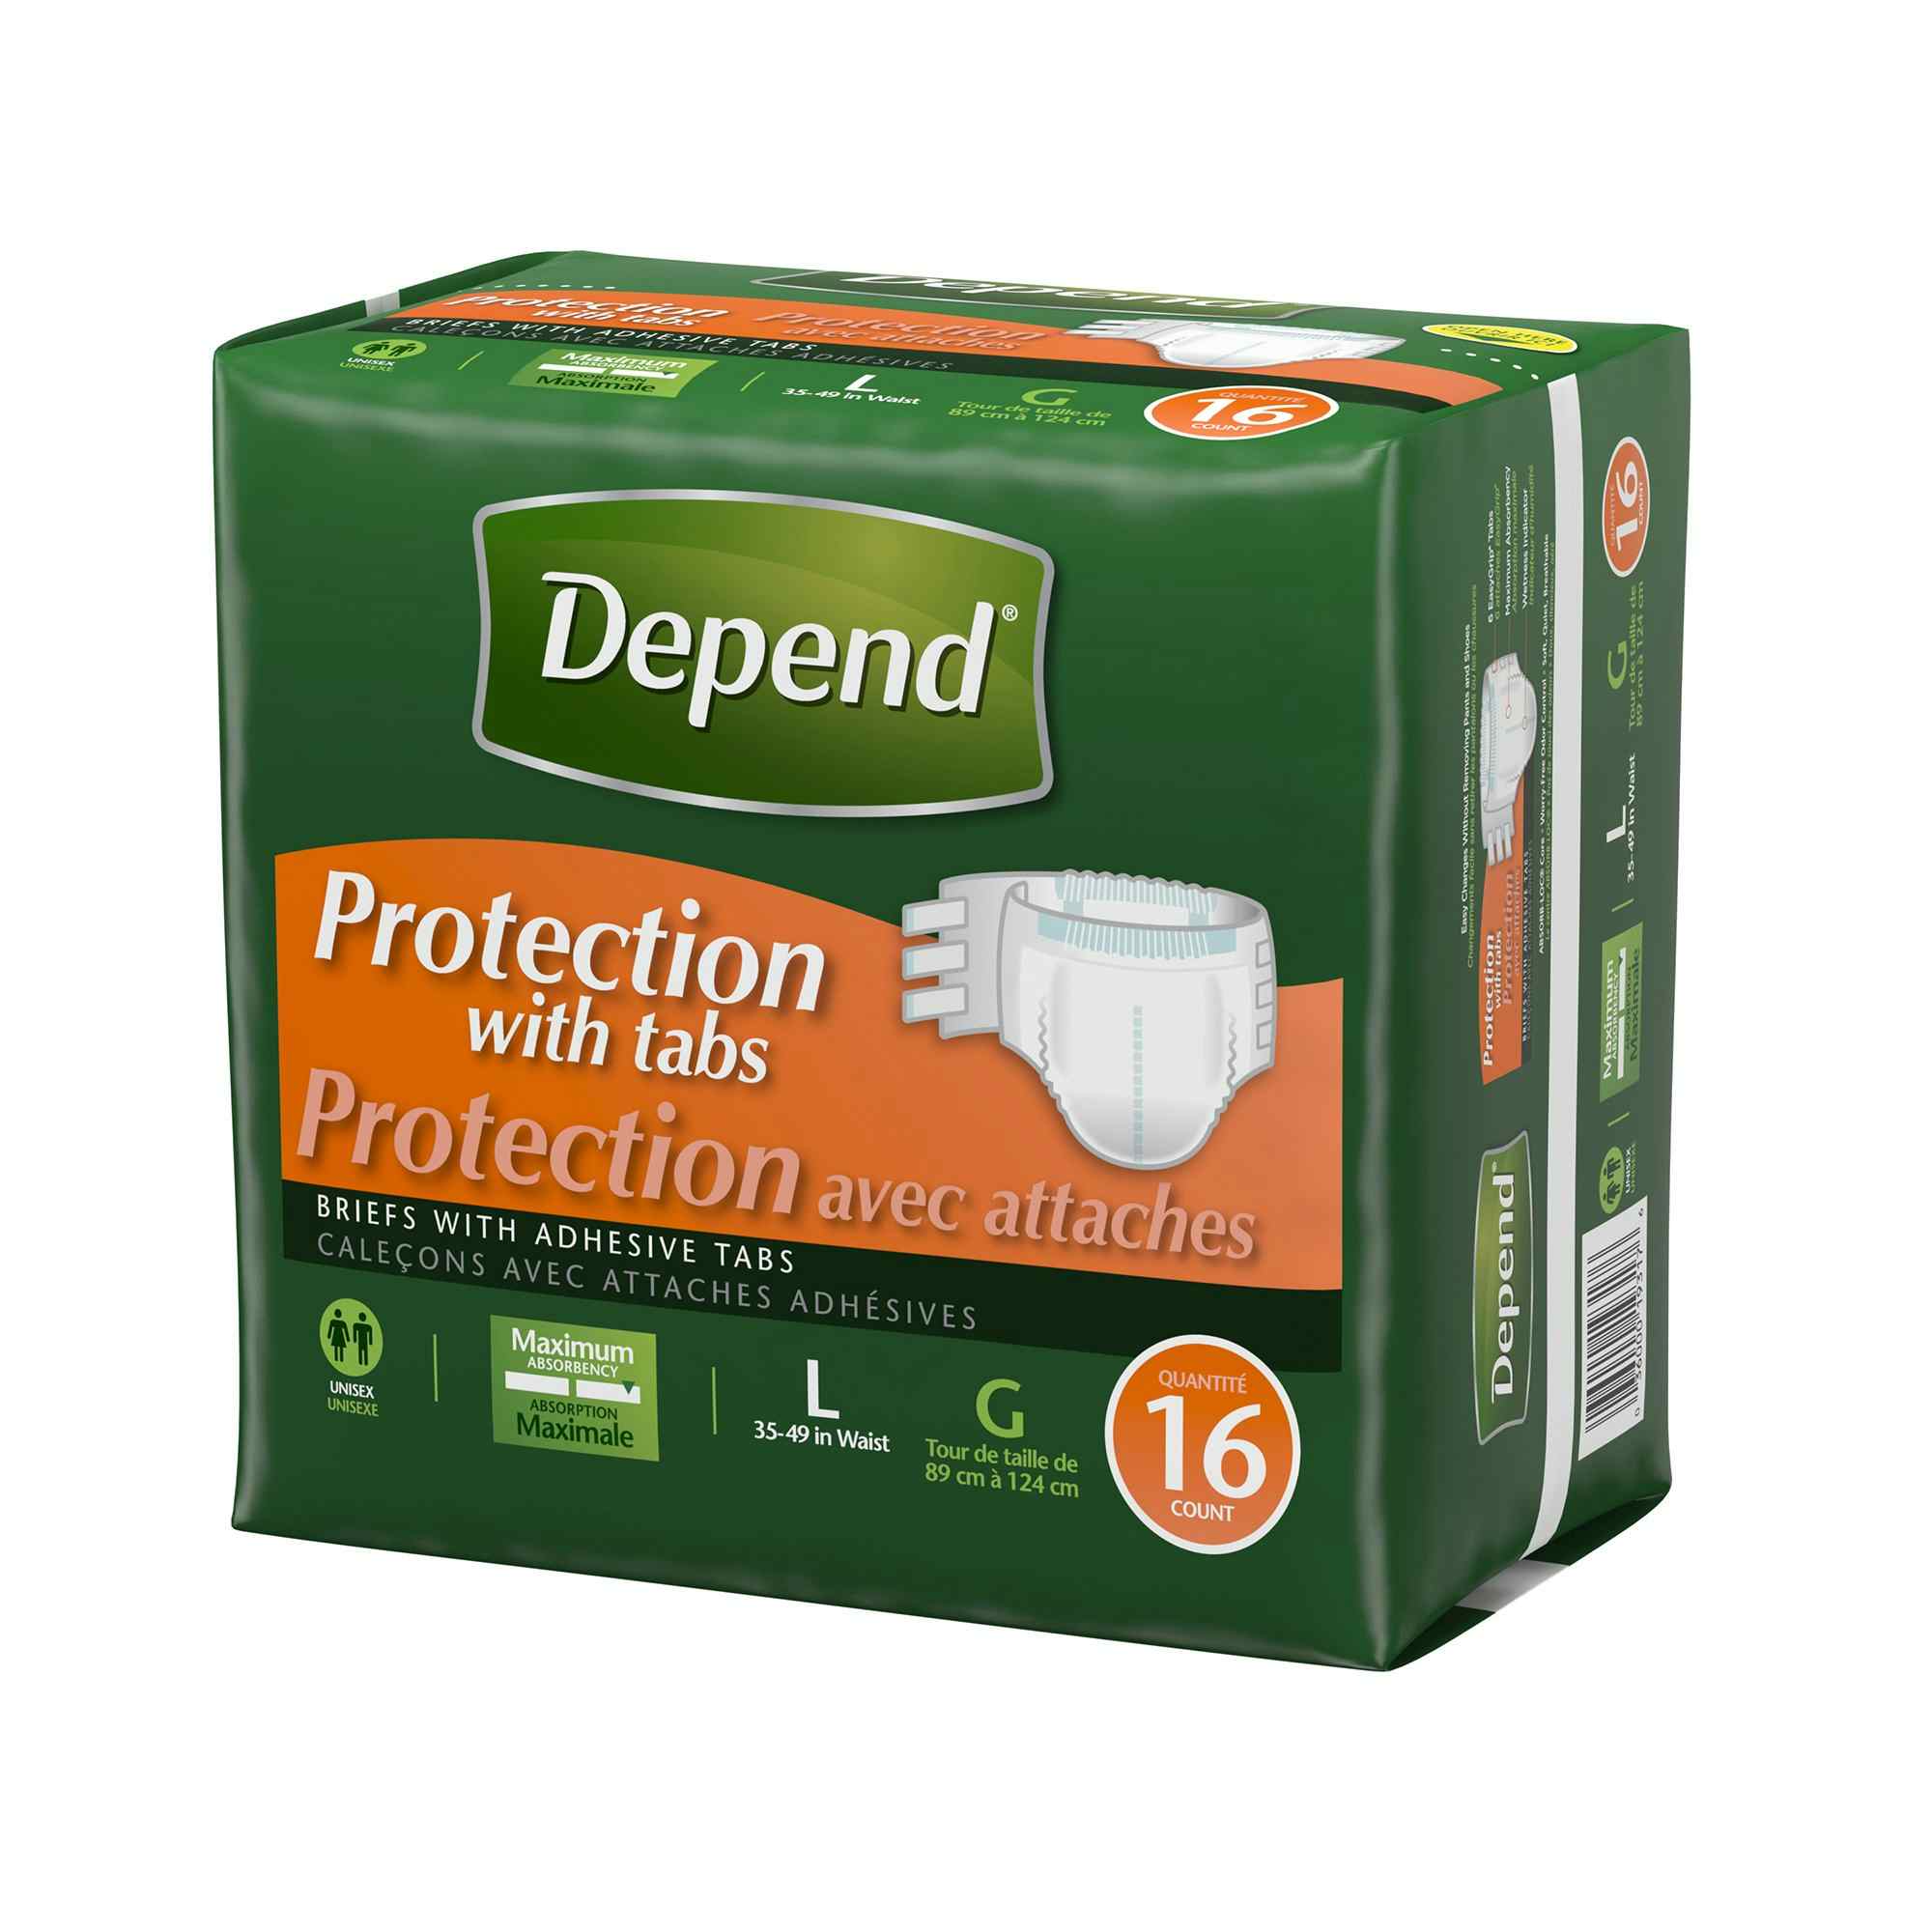 Depend protection with tabs